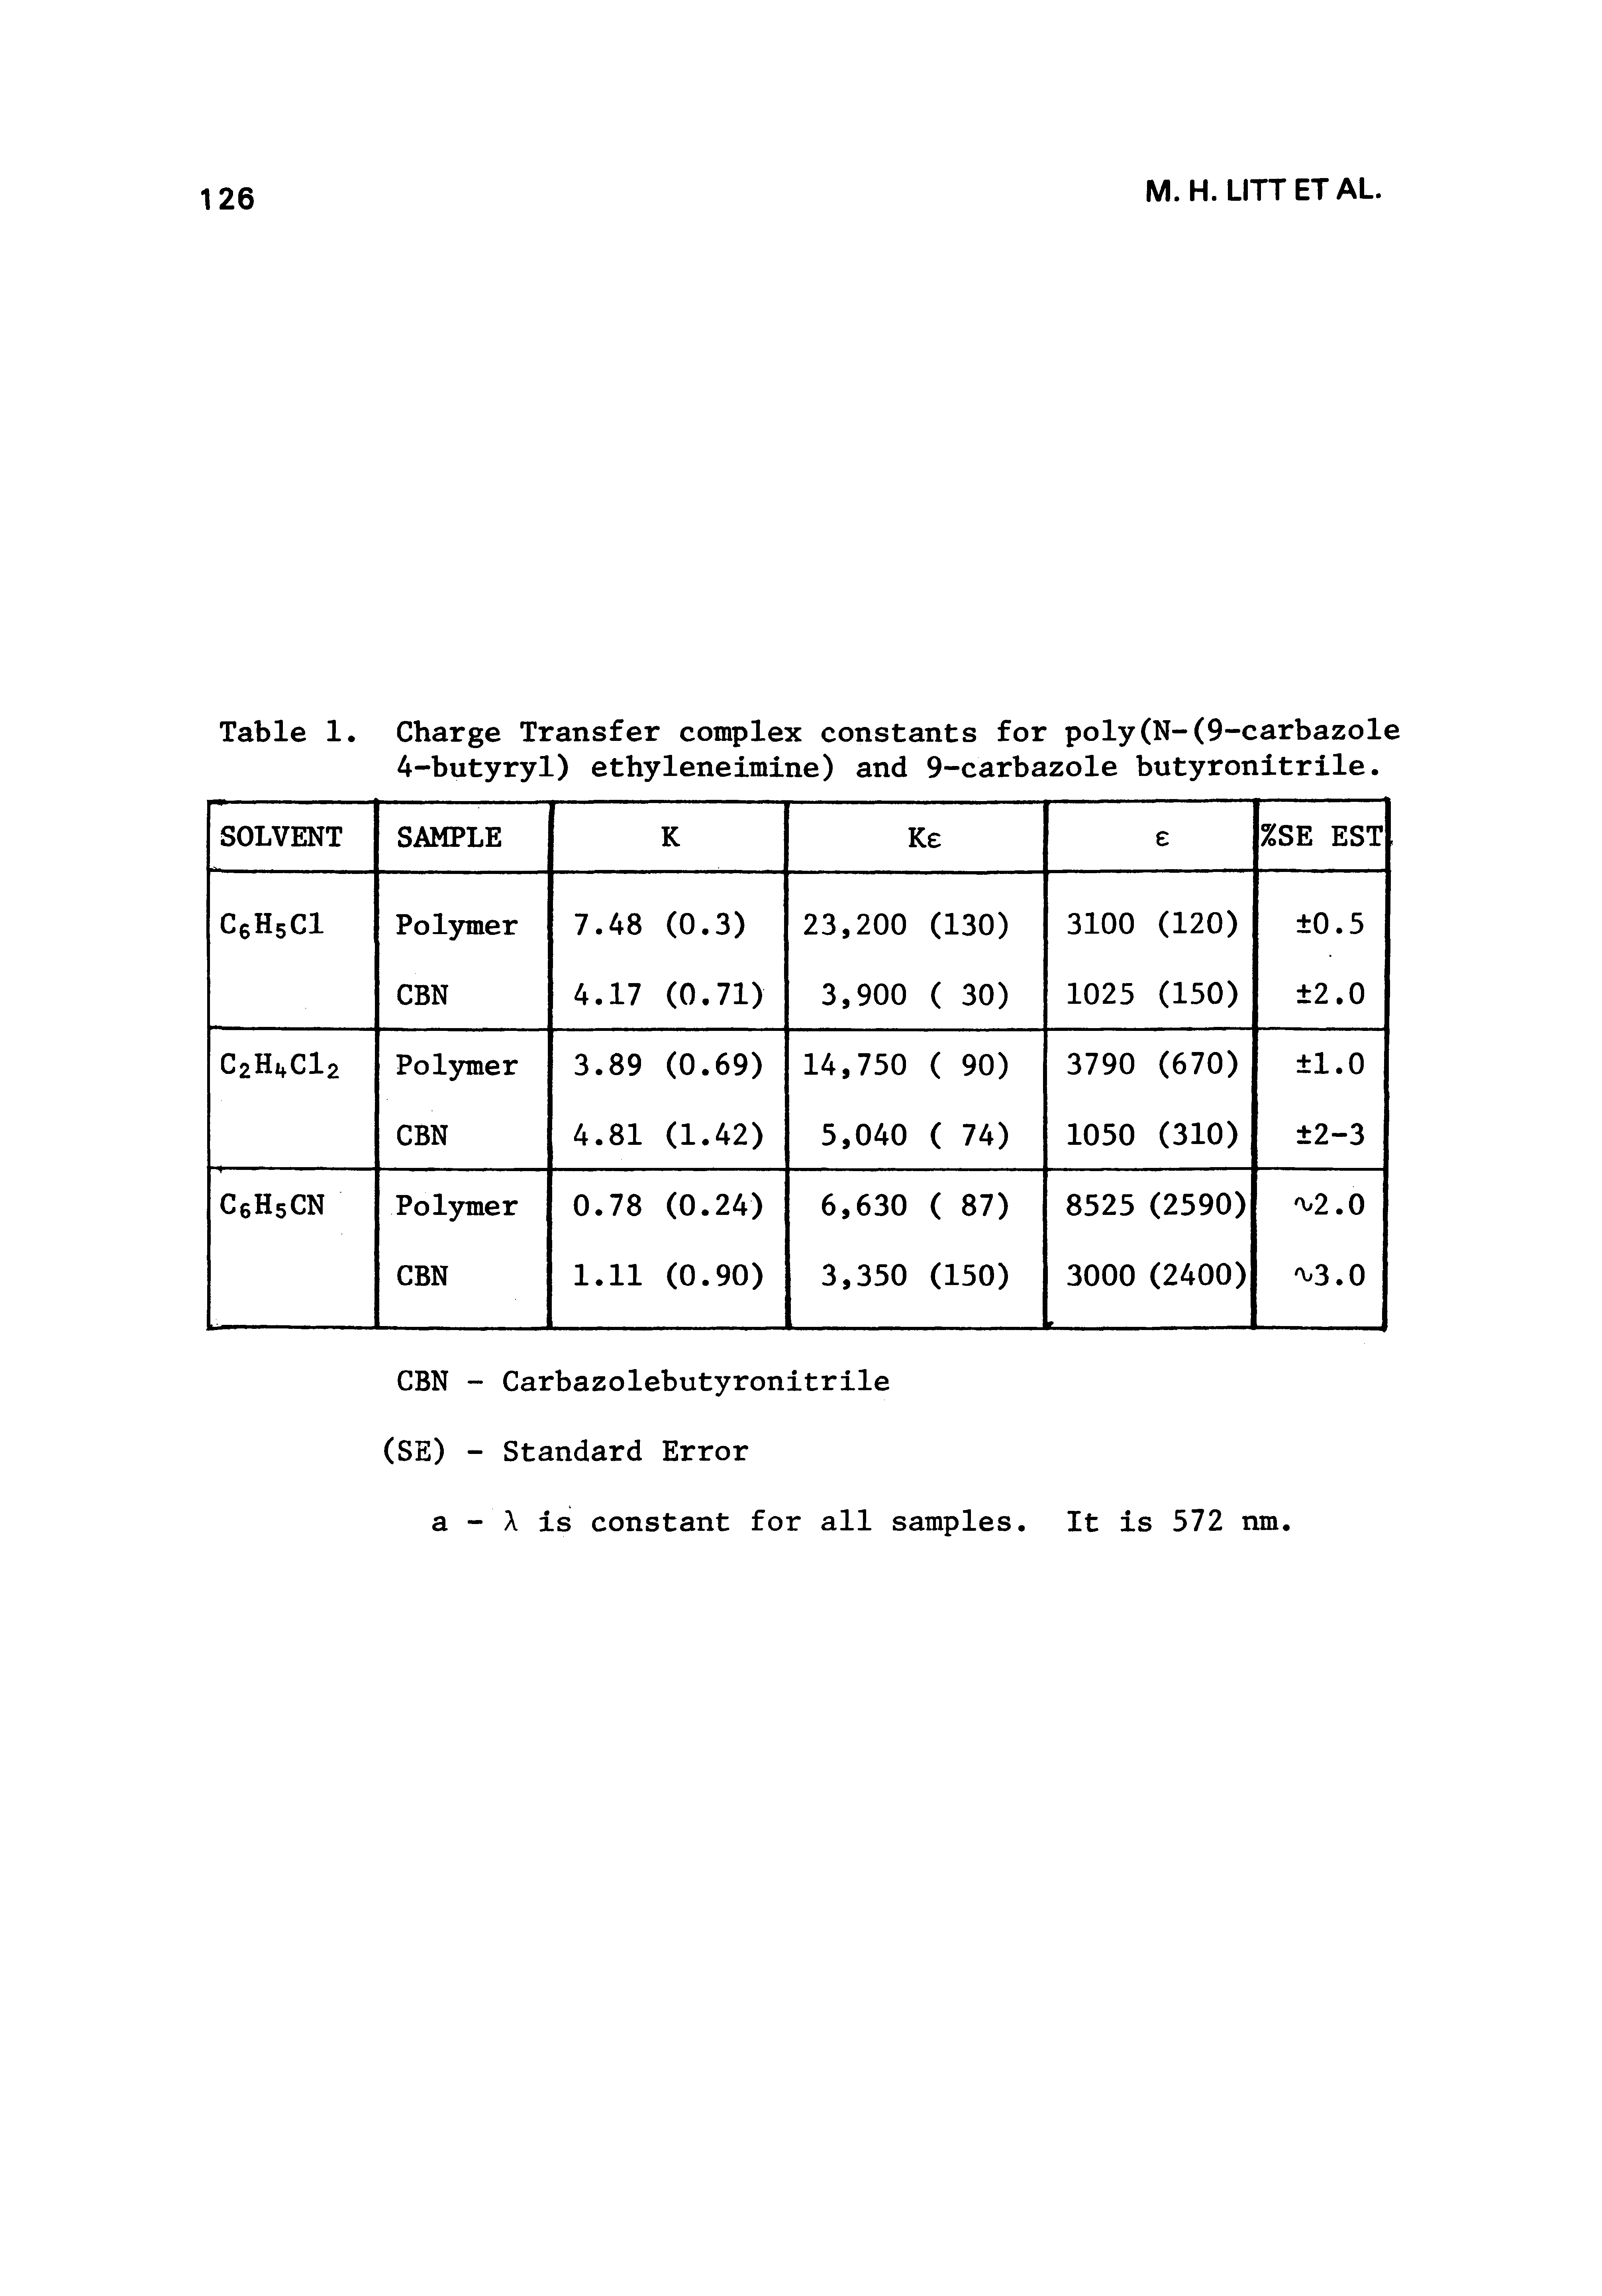 Table 1. Charge Transfer complex constants for poly(N-(9-carbazole 4-butyryl) ethyleneimine) and 9-carbazole butyronitrile.